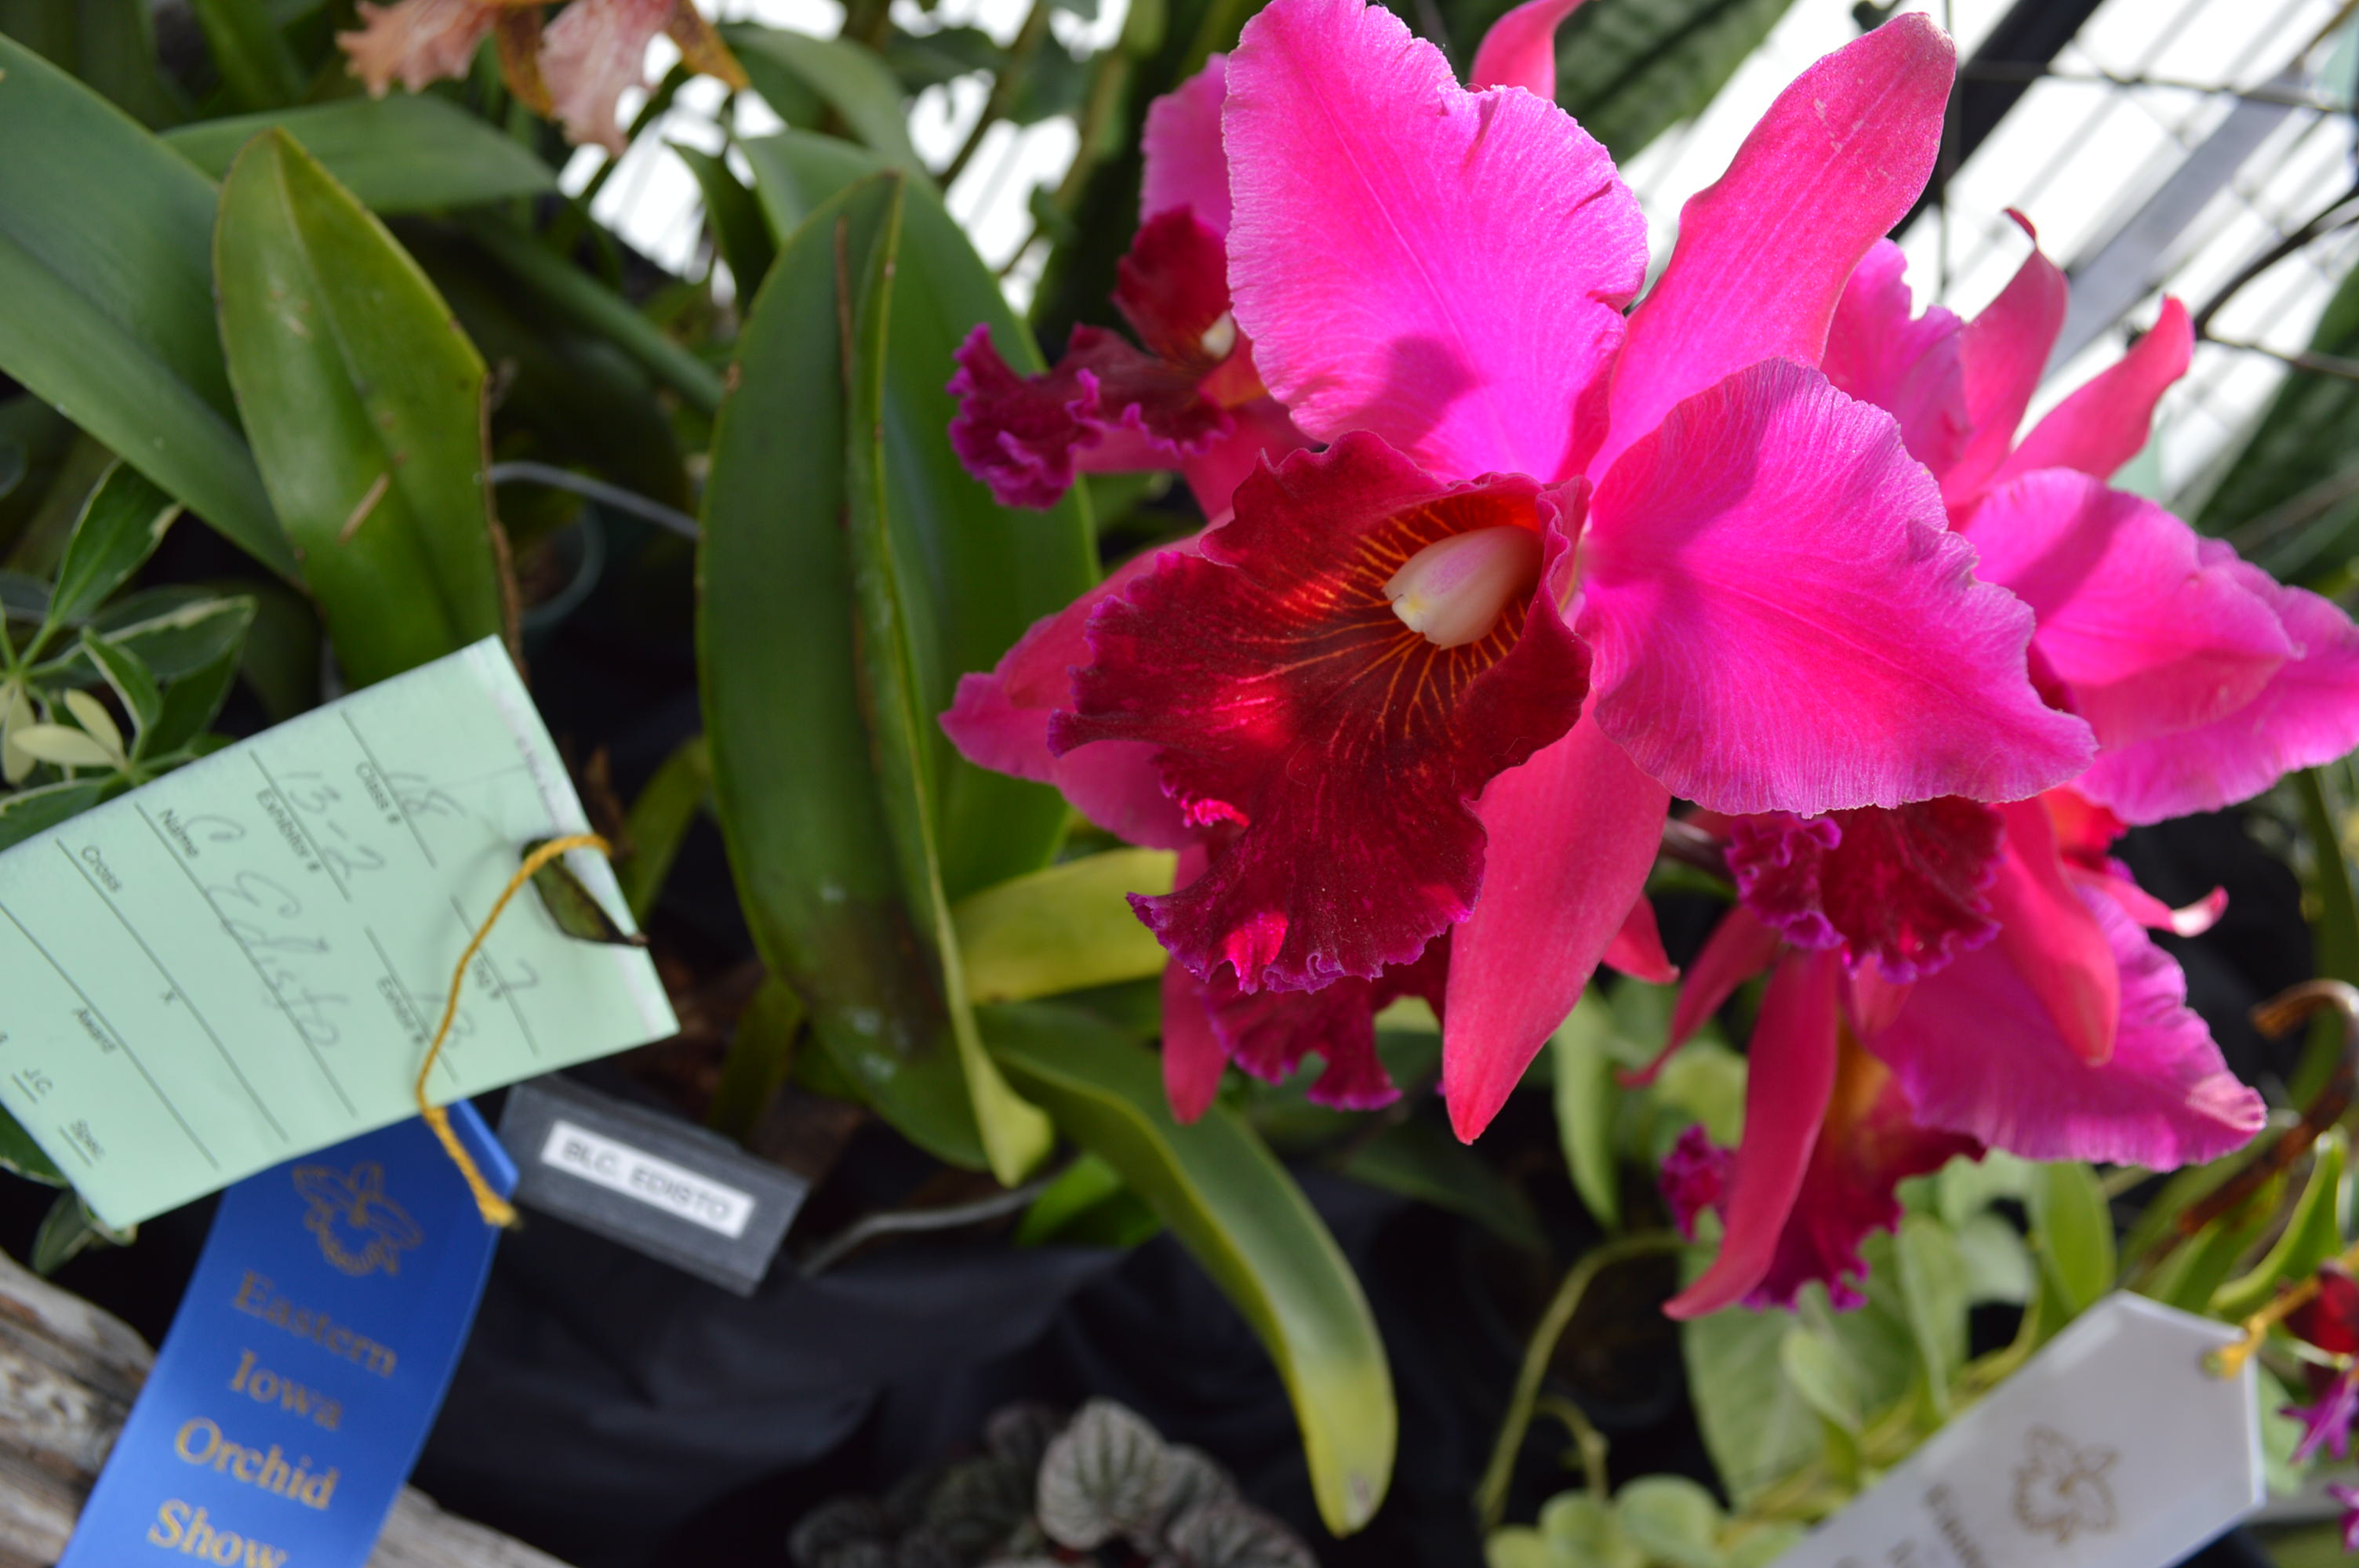 New event at Noelridge Park orchid show